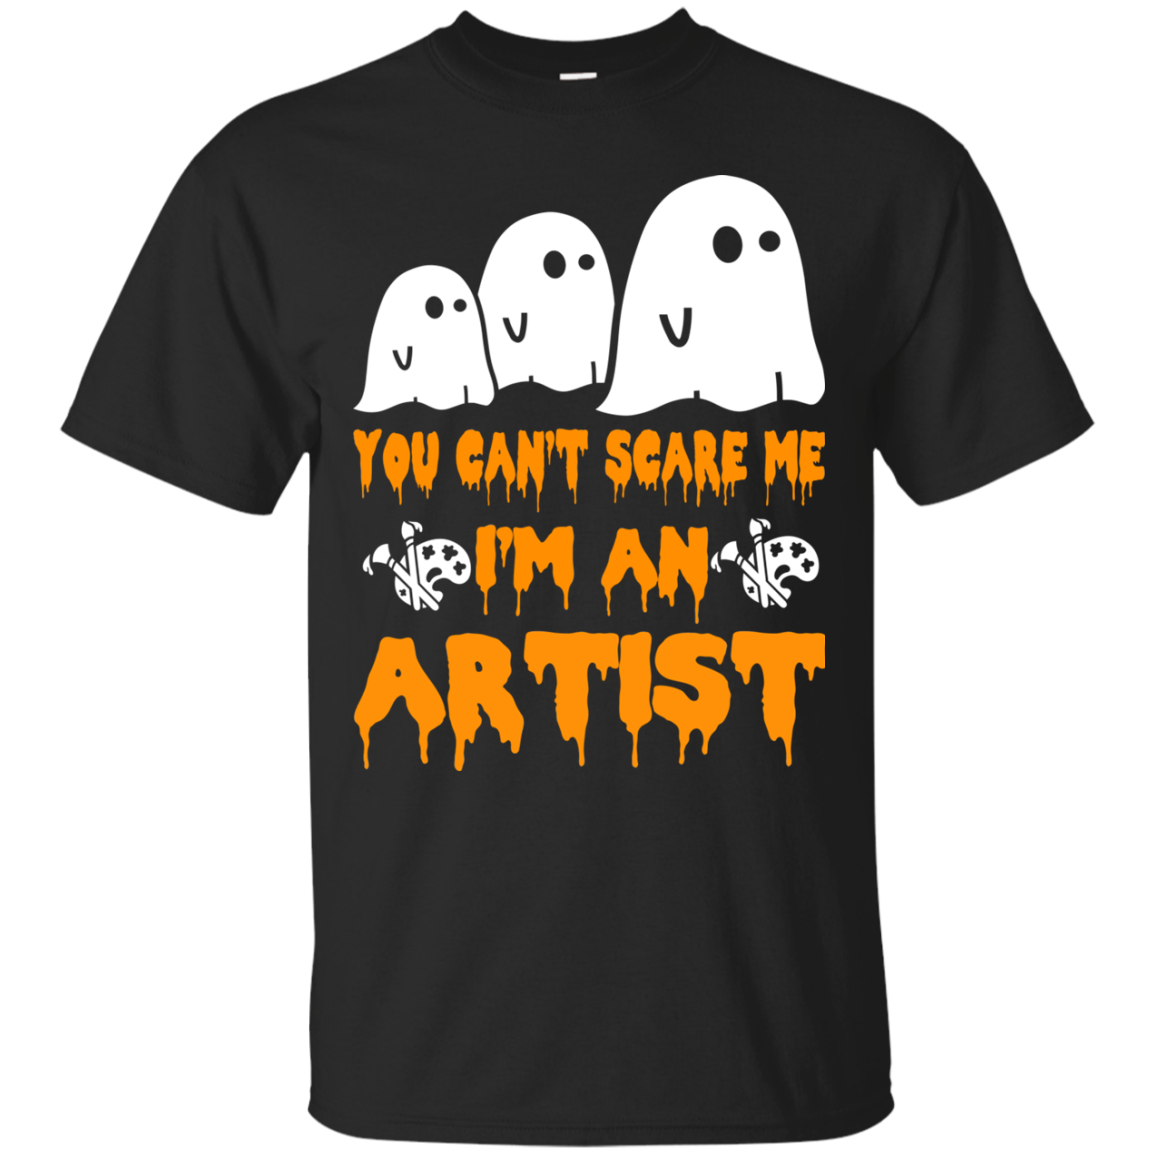 You can’t scare me I'm an Artist shirt, hoodie, tank